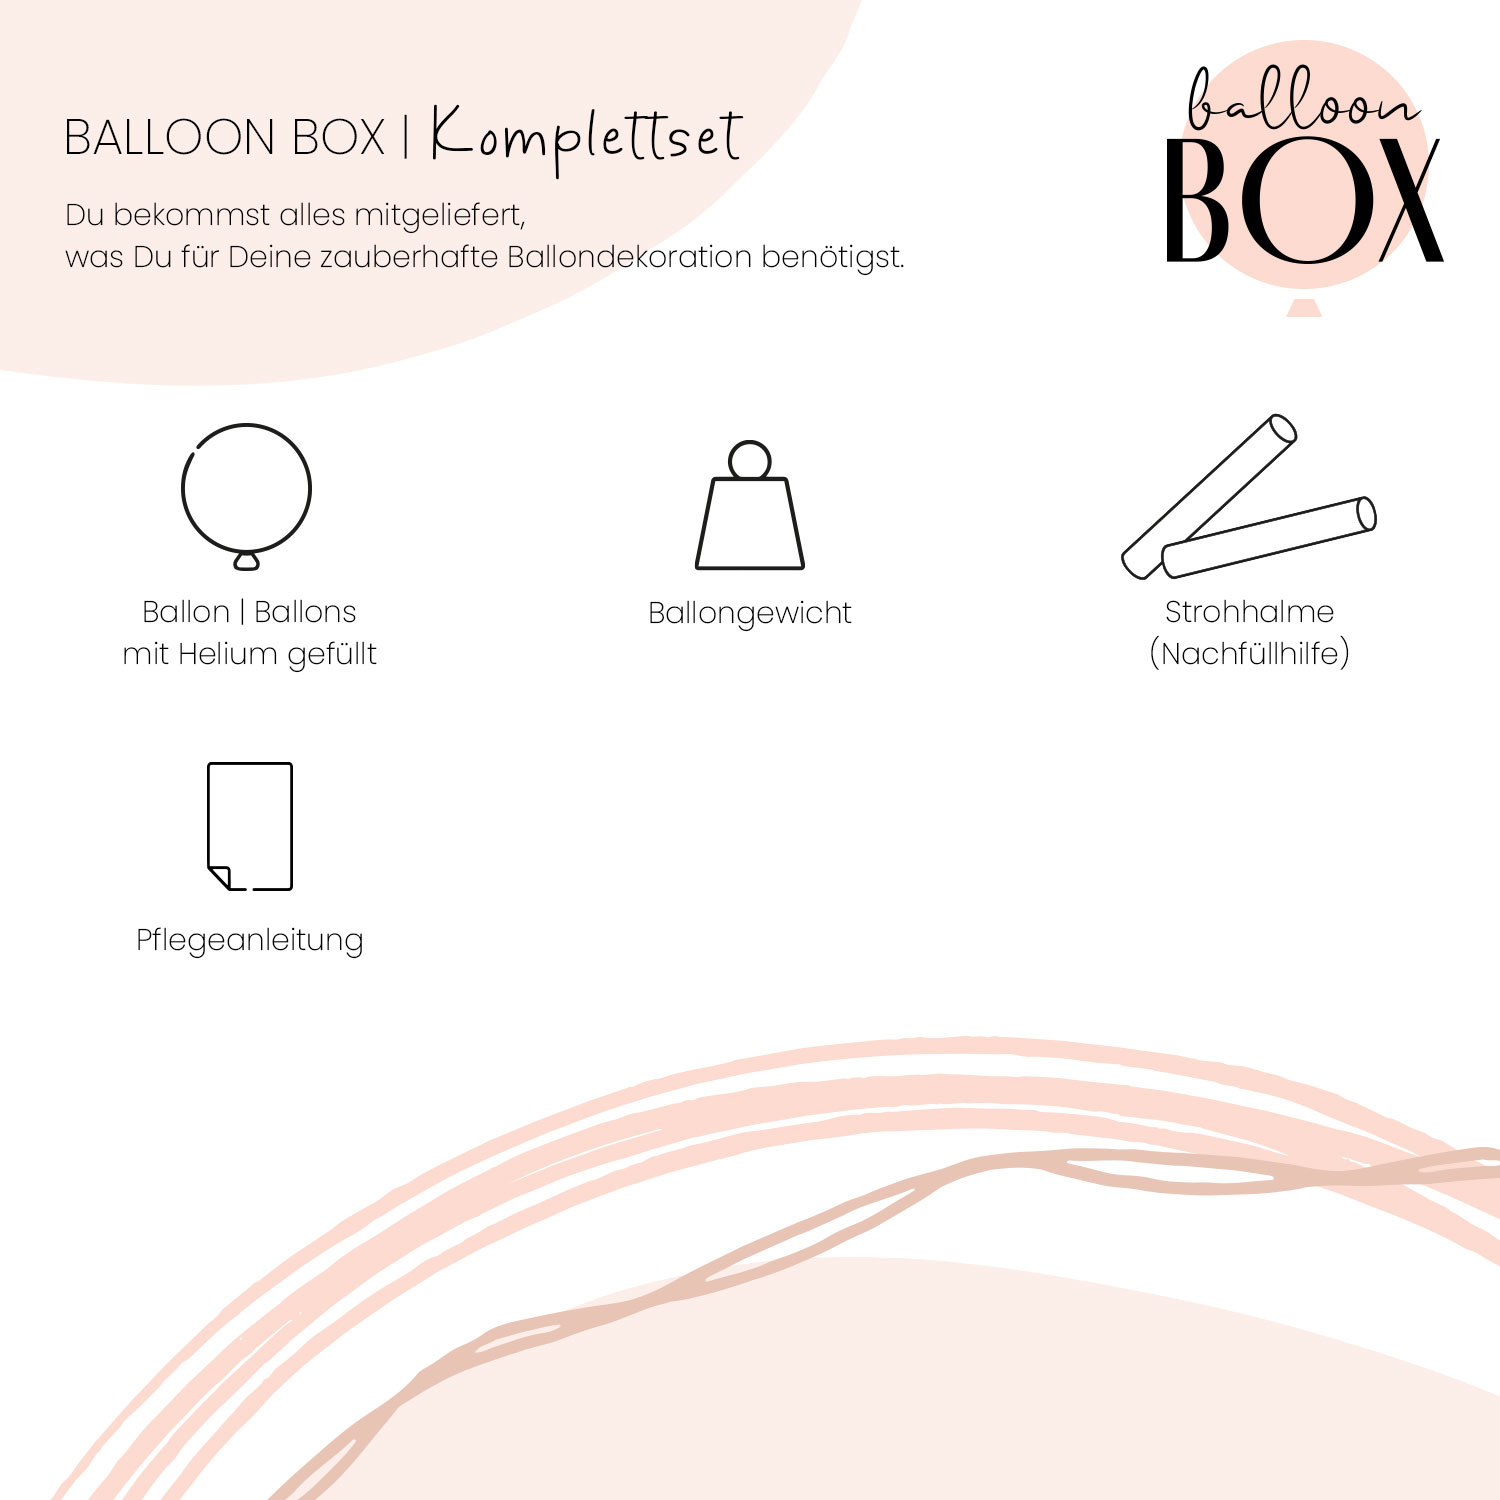 Heliumballon in a Box - Du wirst Oma